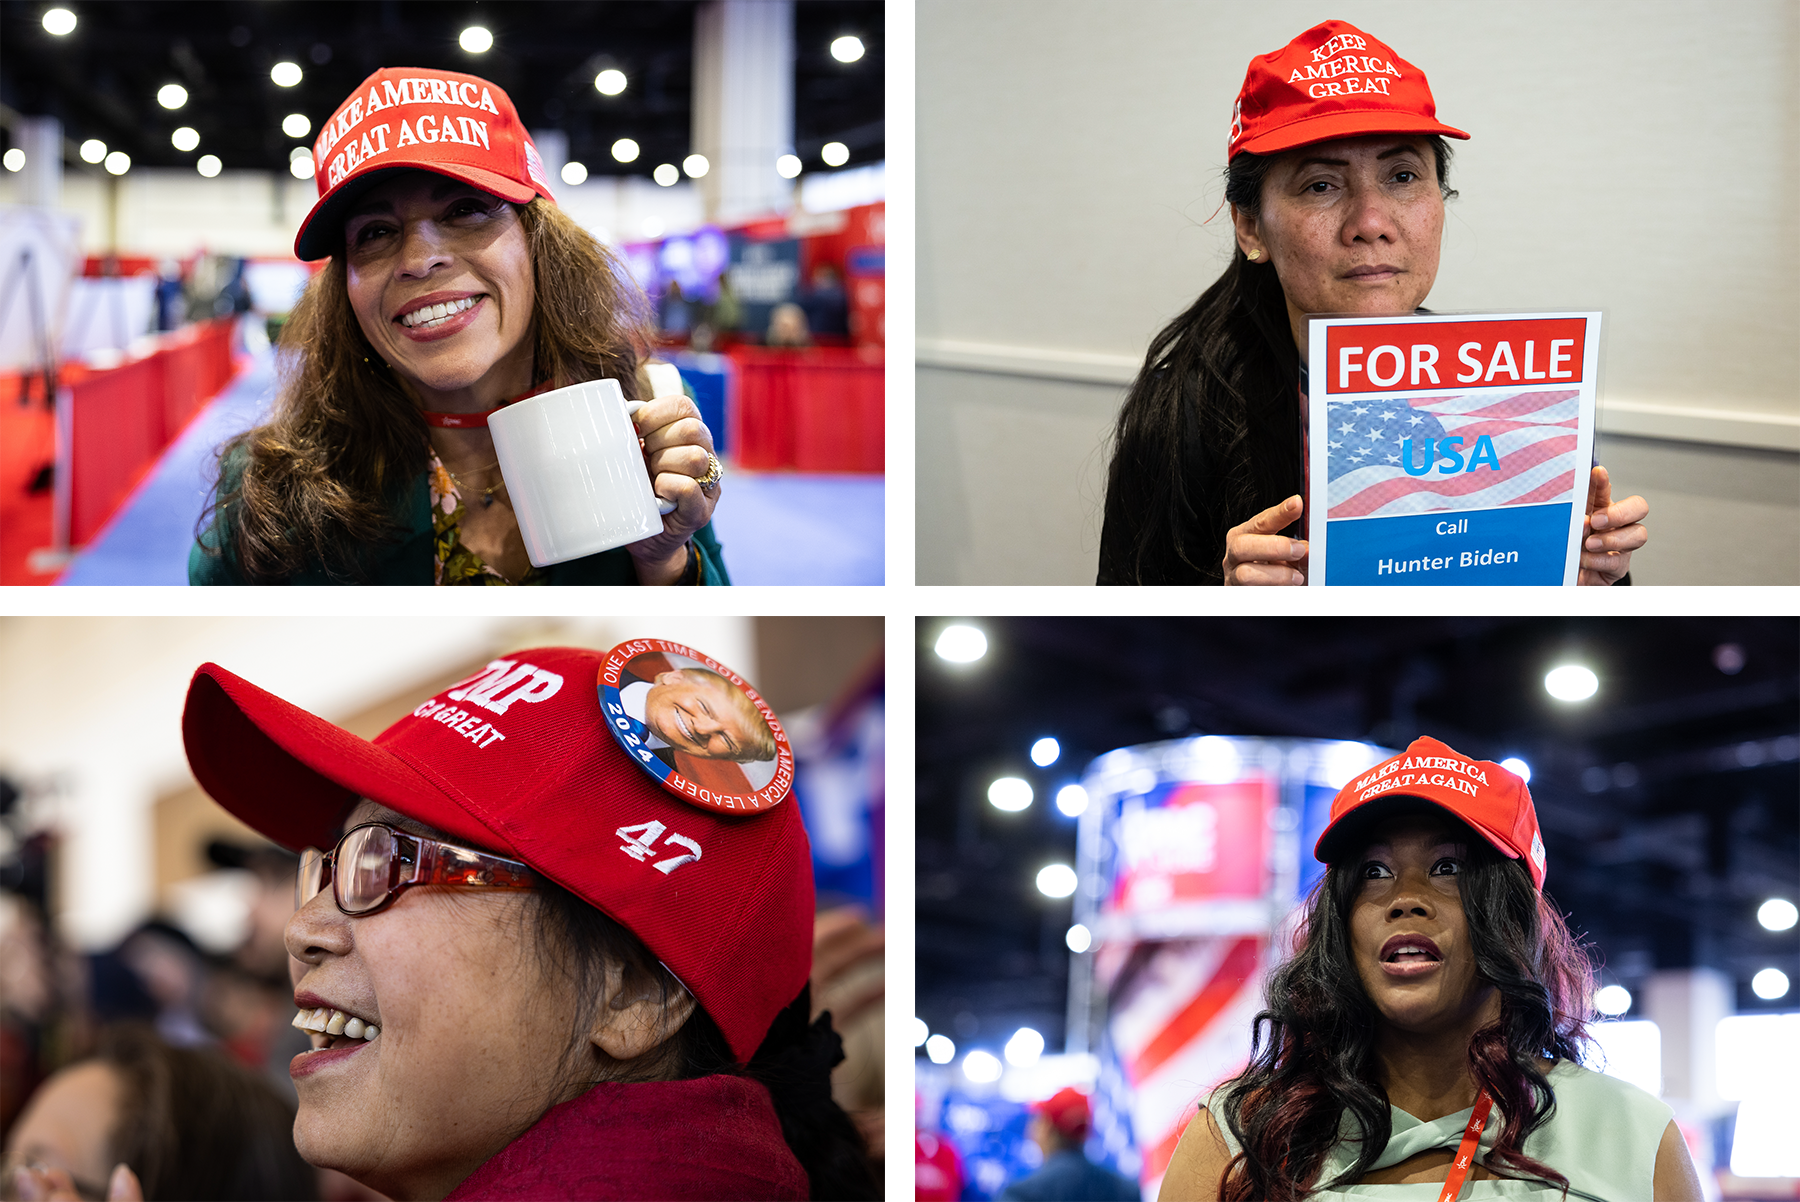 The MAGA movement showed up sporting red hats and buttons with Trump’s face.